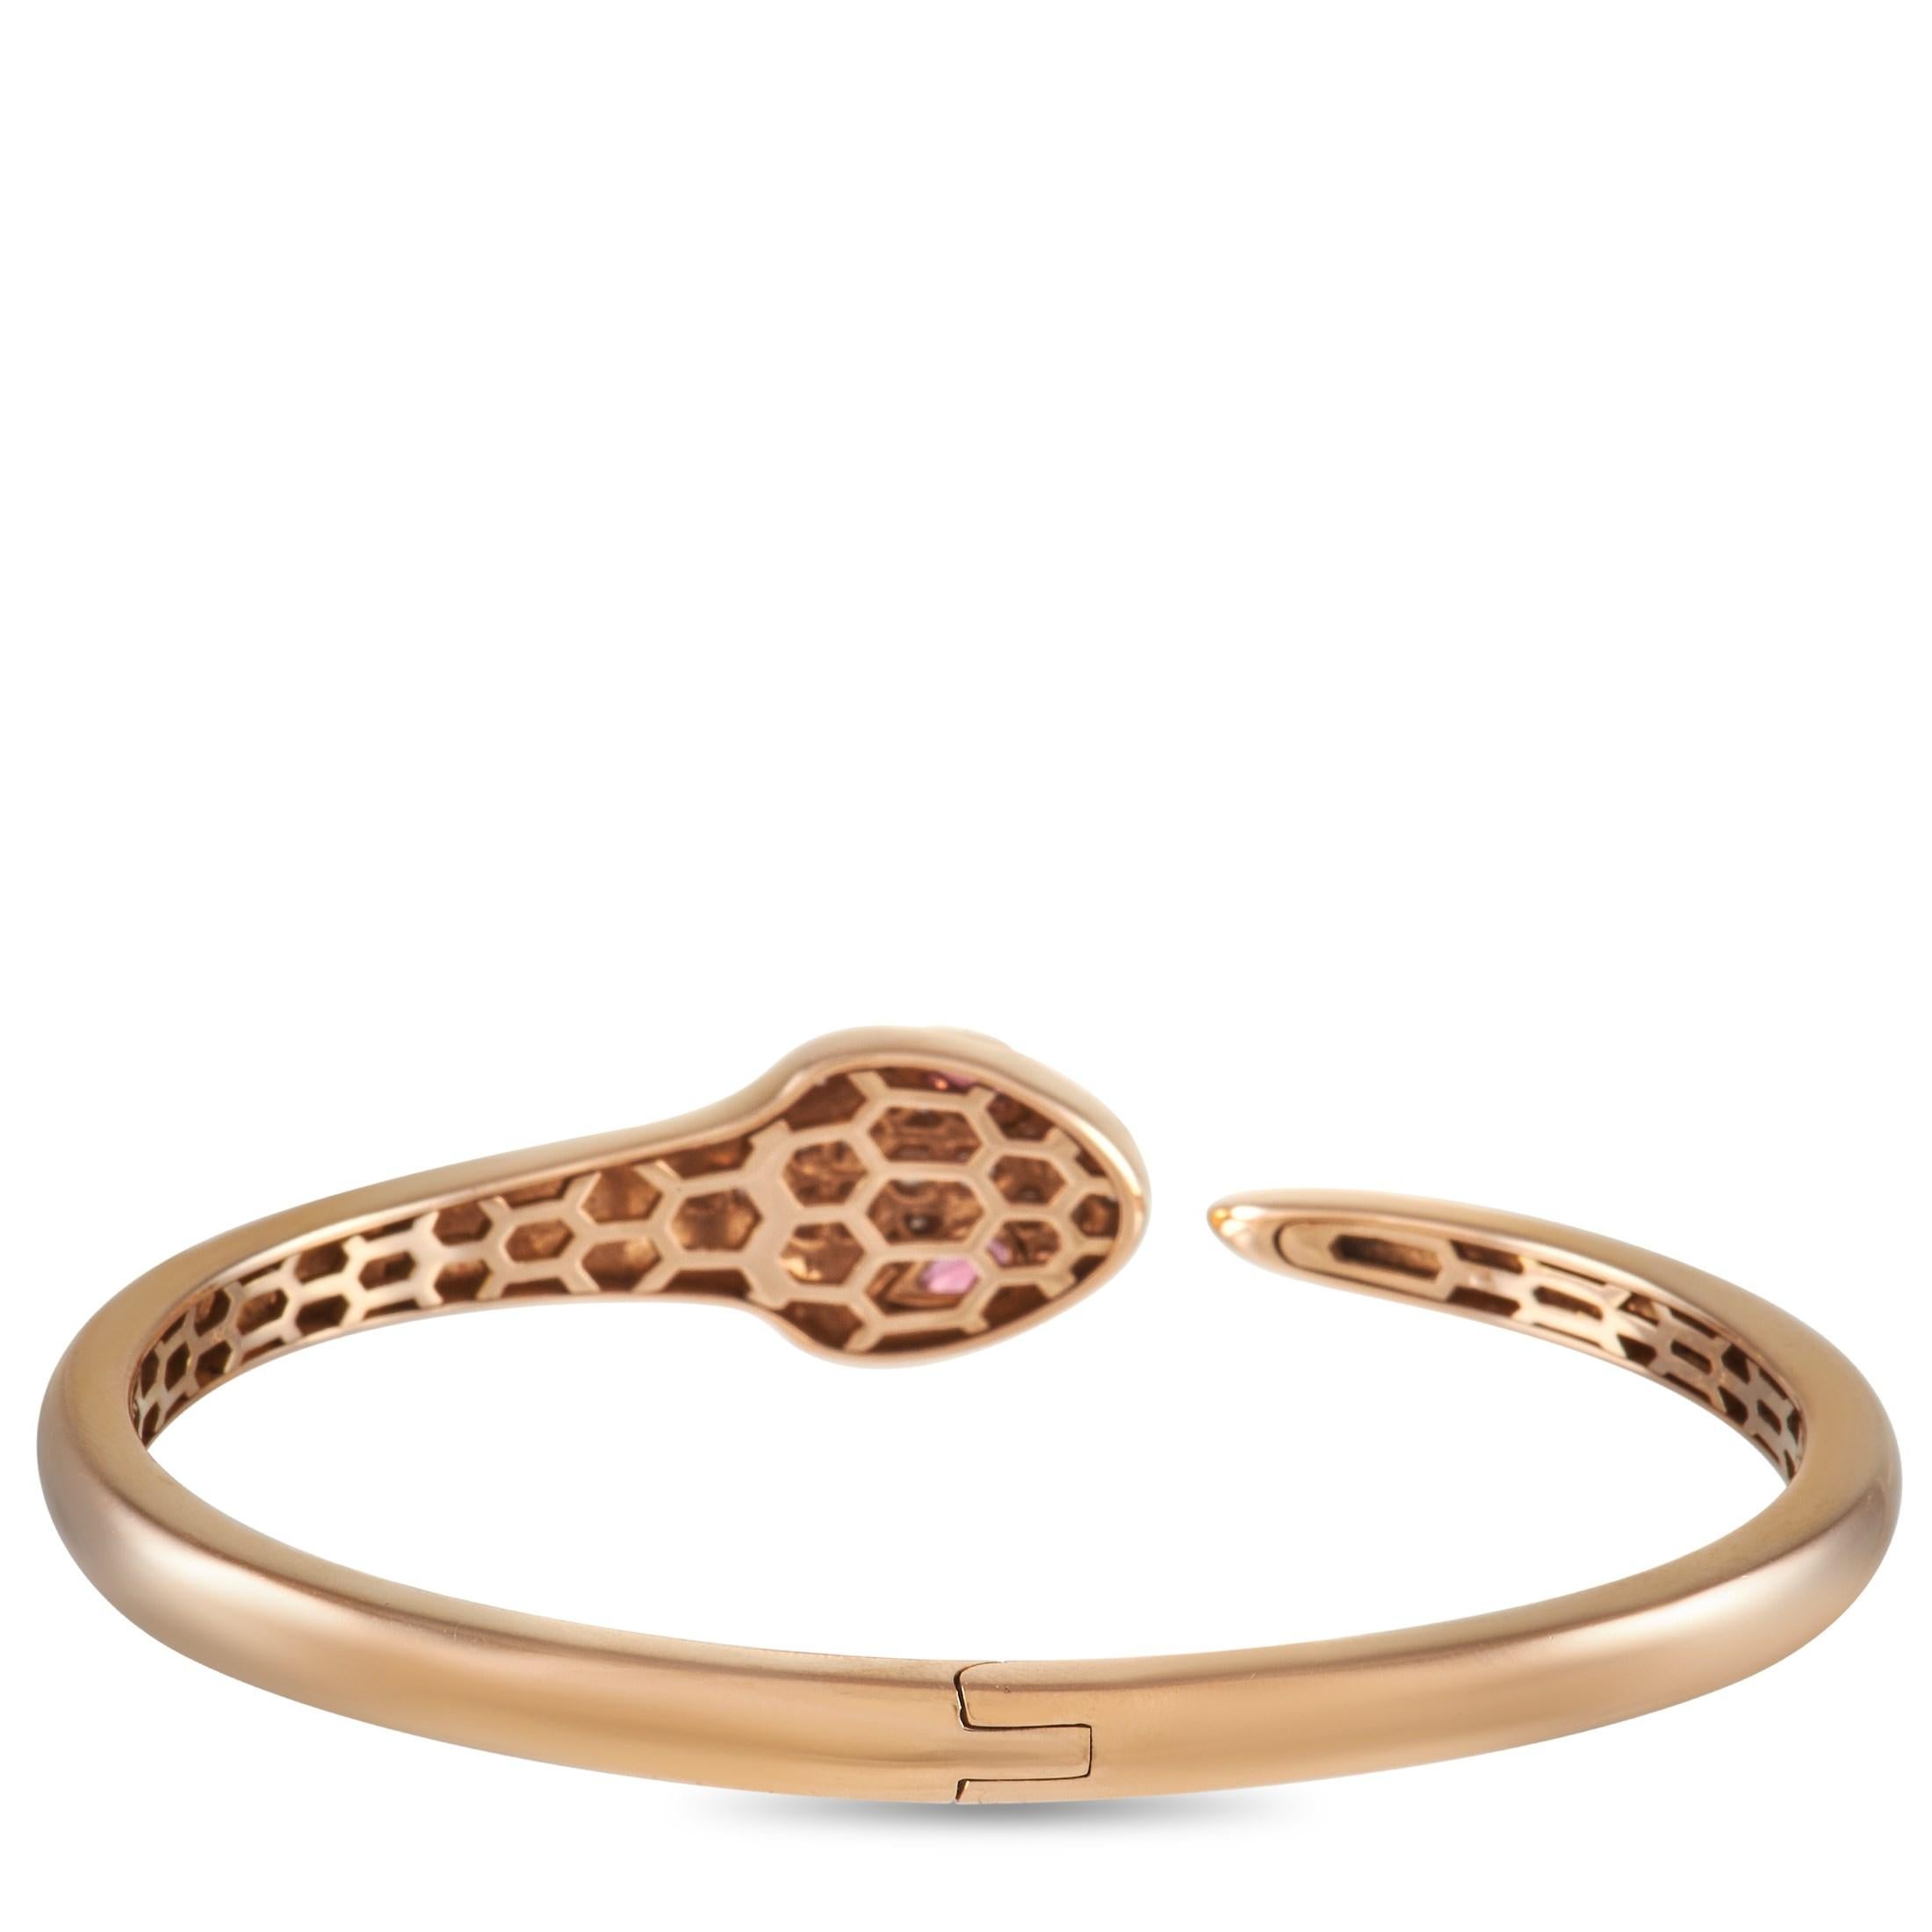 From Bvlgari's Serpenti Collection is this rose gold bangle bracelet sculpted to form a snake silhouette. The 